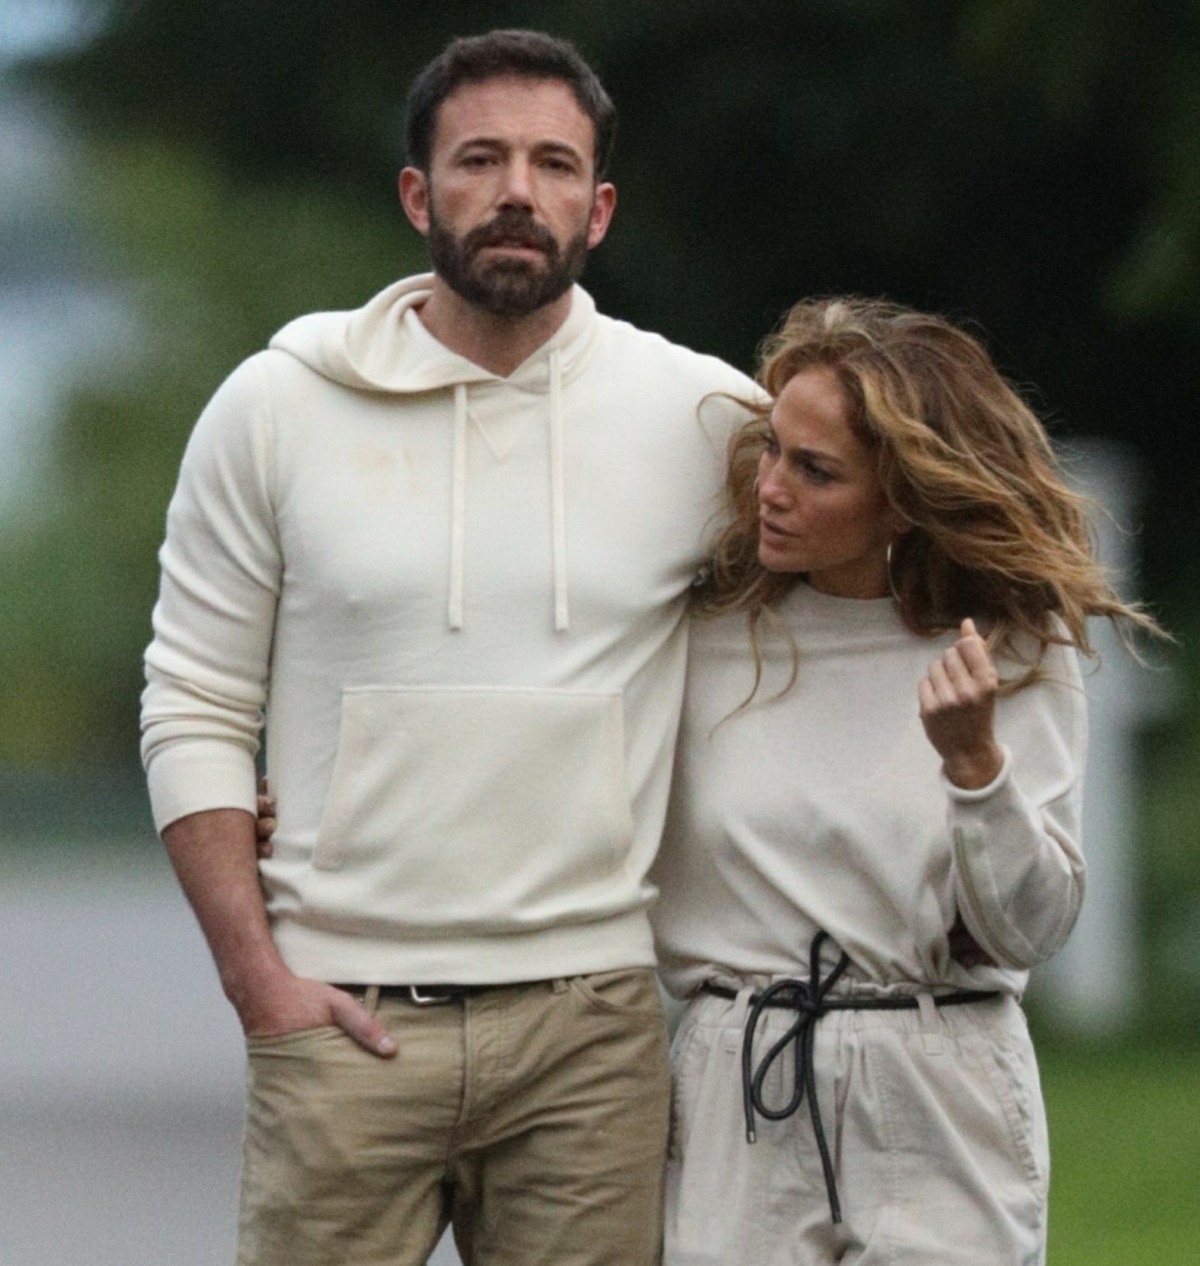 Jennifer Lopez and Ben Affleck go for an evening stroll in The Hamptons